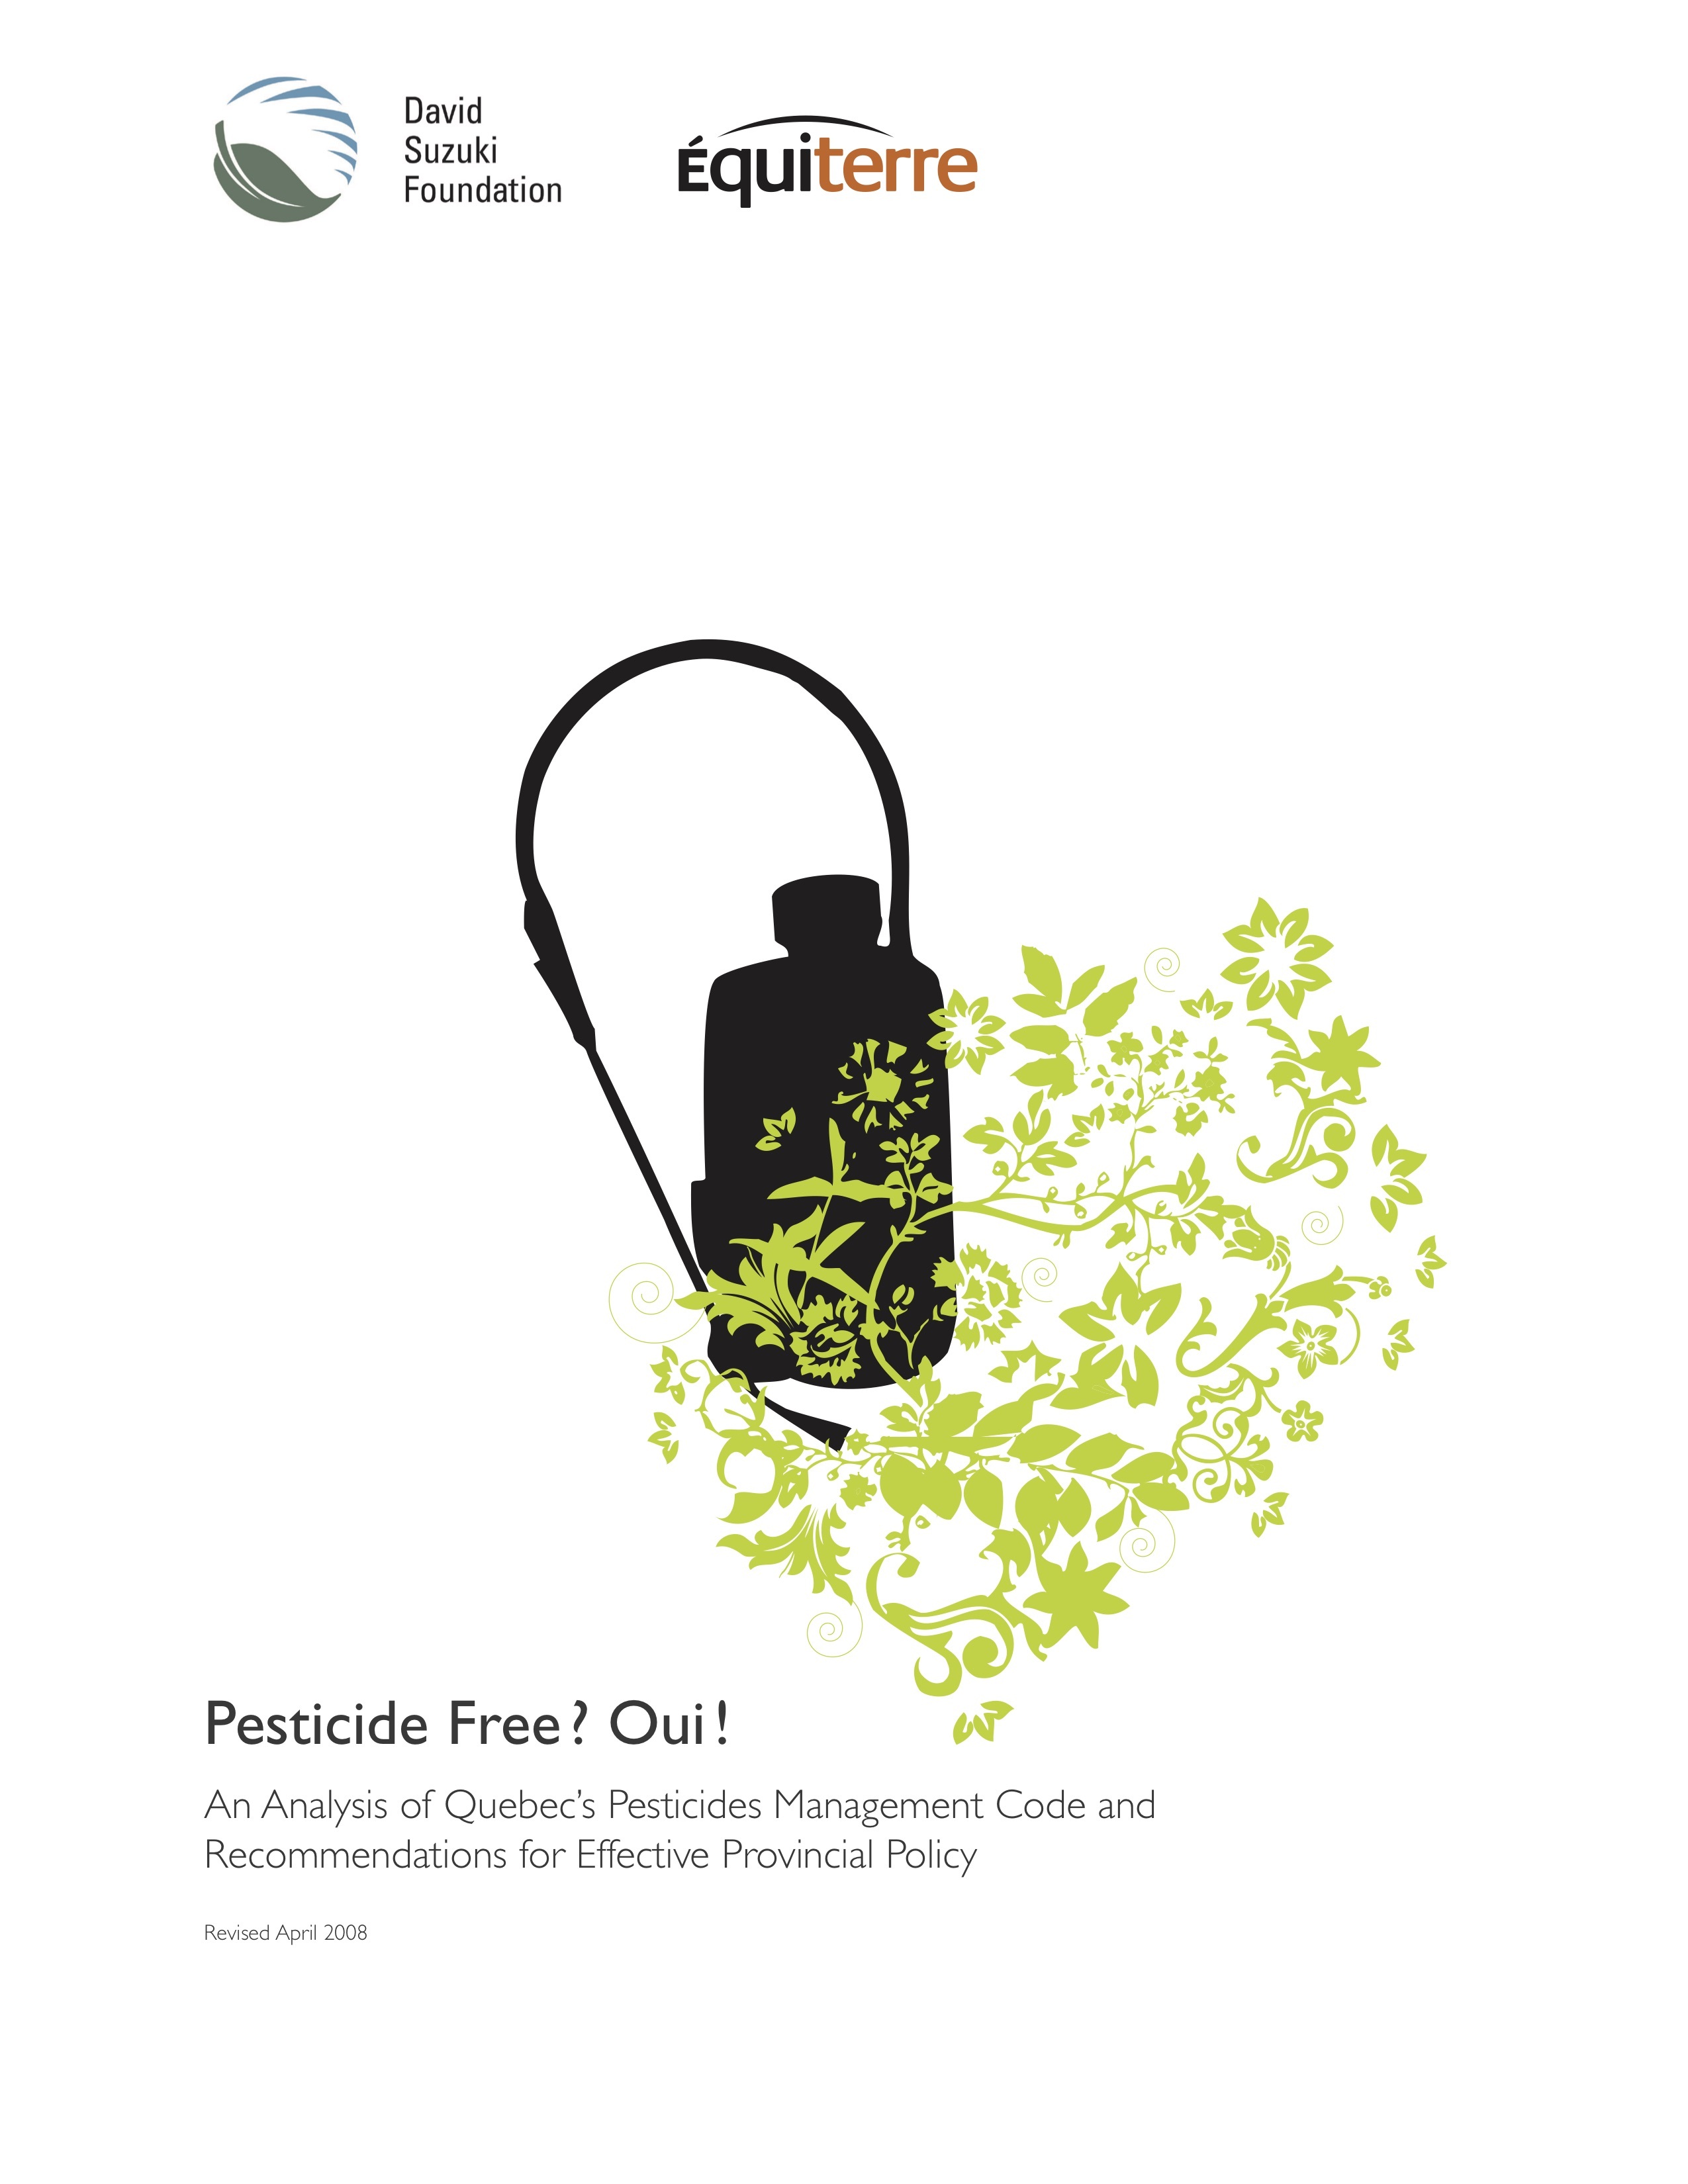 Pesticide Free? Oui!: An Analysis of Quebec's Pesticides Management Code and Recommendations for Effective Provincial Policy